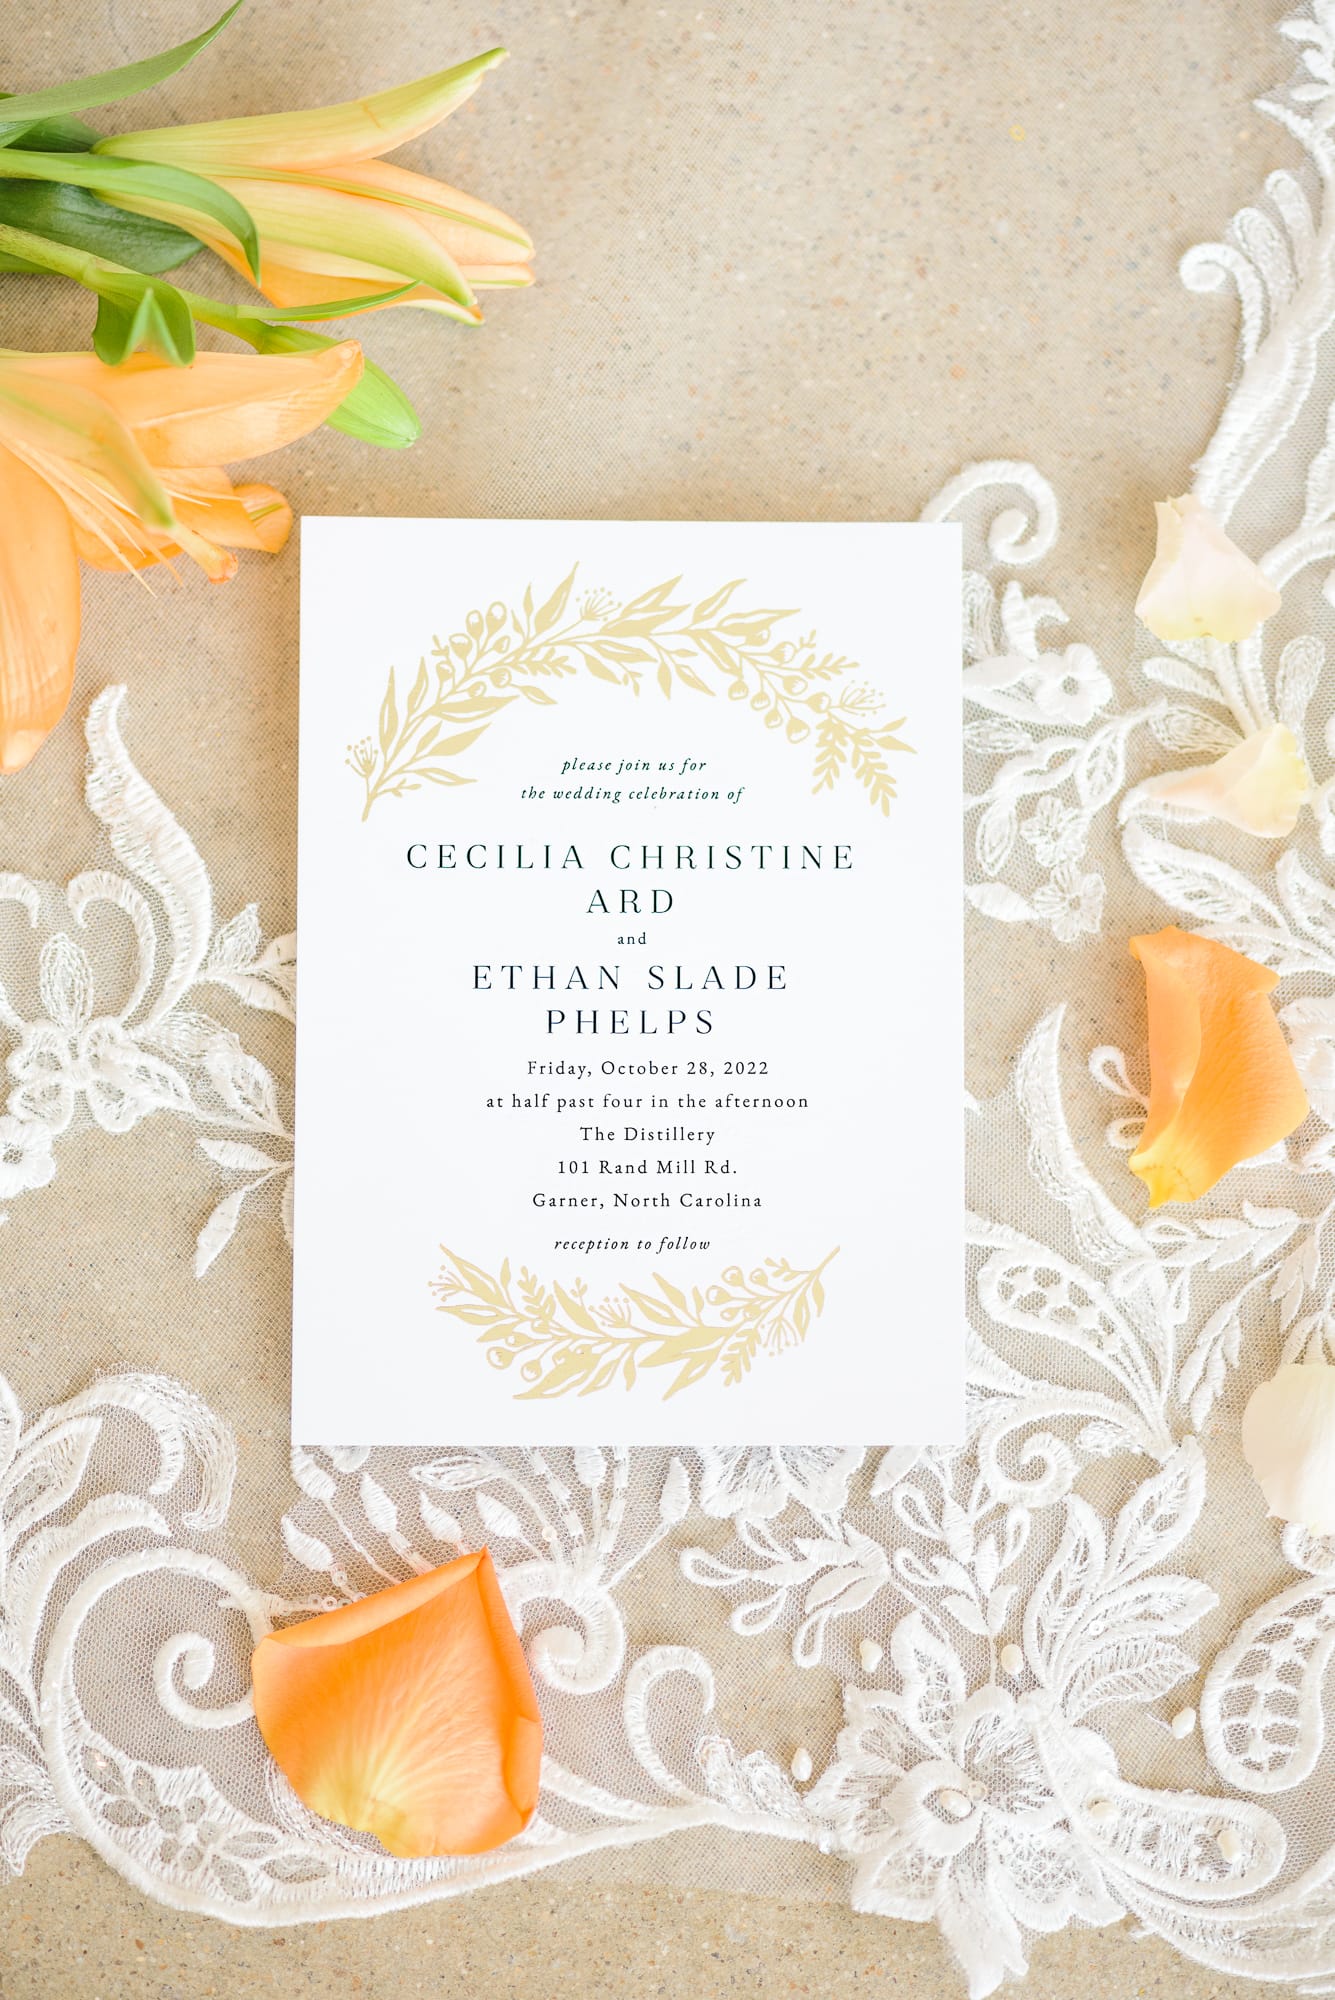 These simple and elegant wedding invitations describe this wedding at the Distillery in Garner, NC